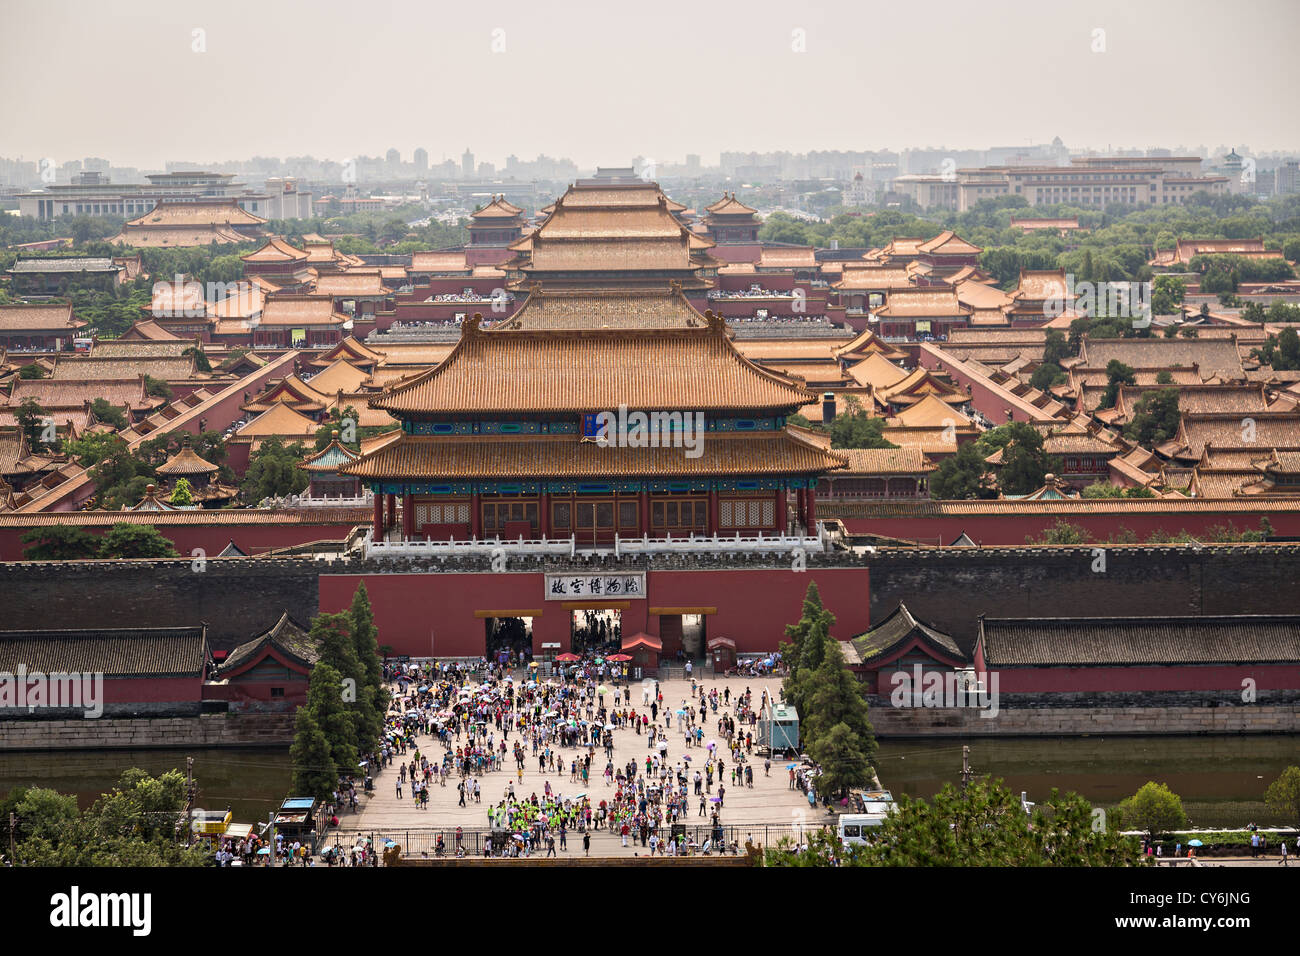 Aerial view of the Forbidden City as seen from Prospect Hill in Jing Shan Park during summer in Beijing, China Stock Photo